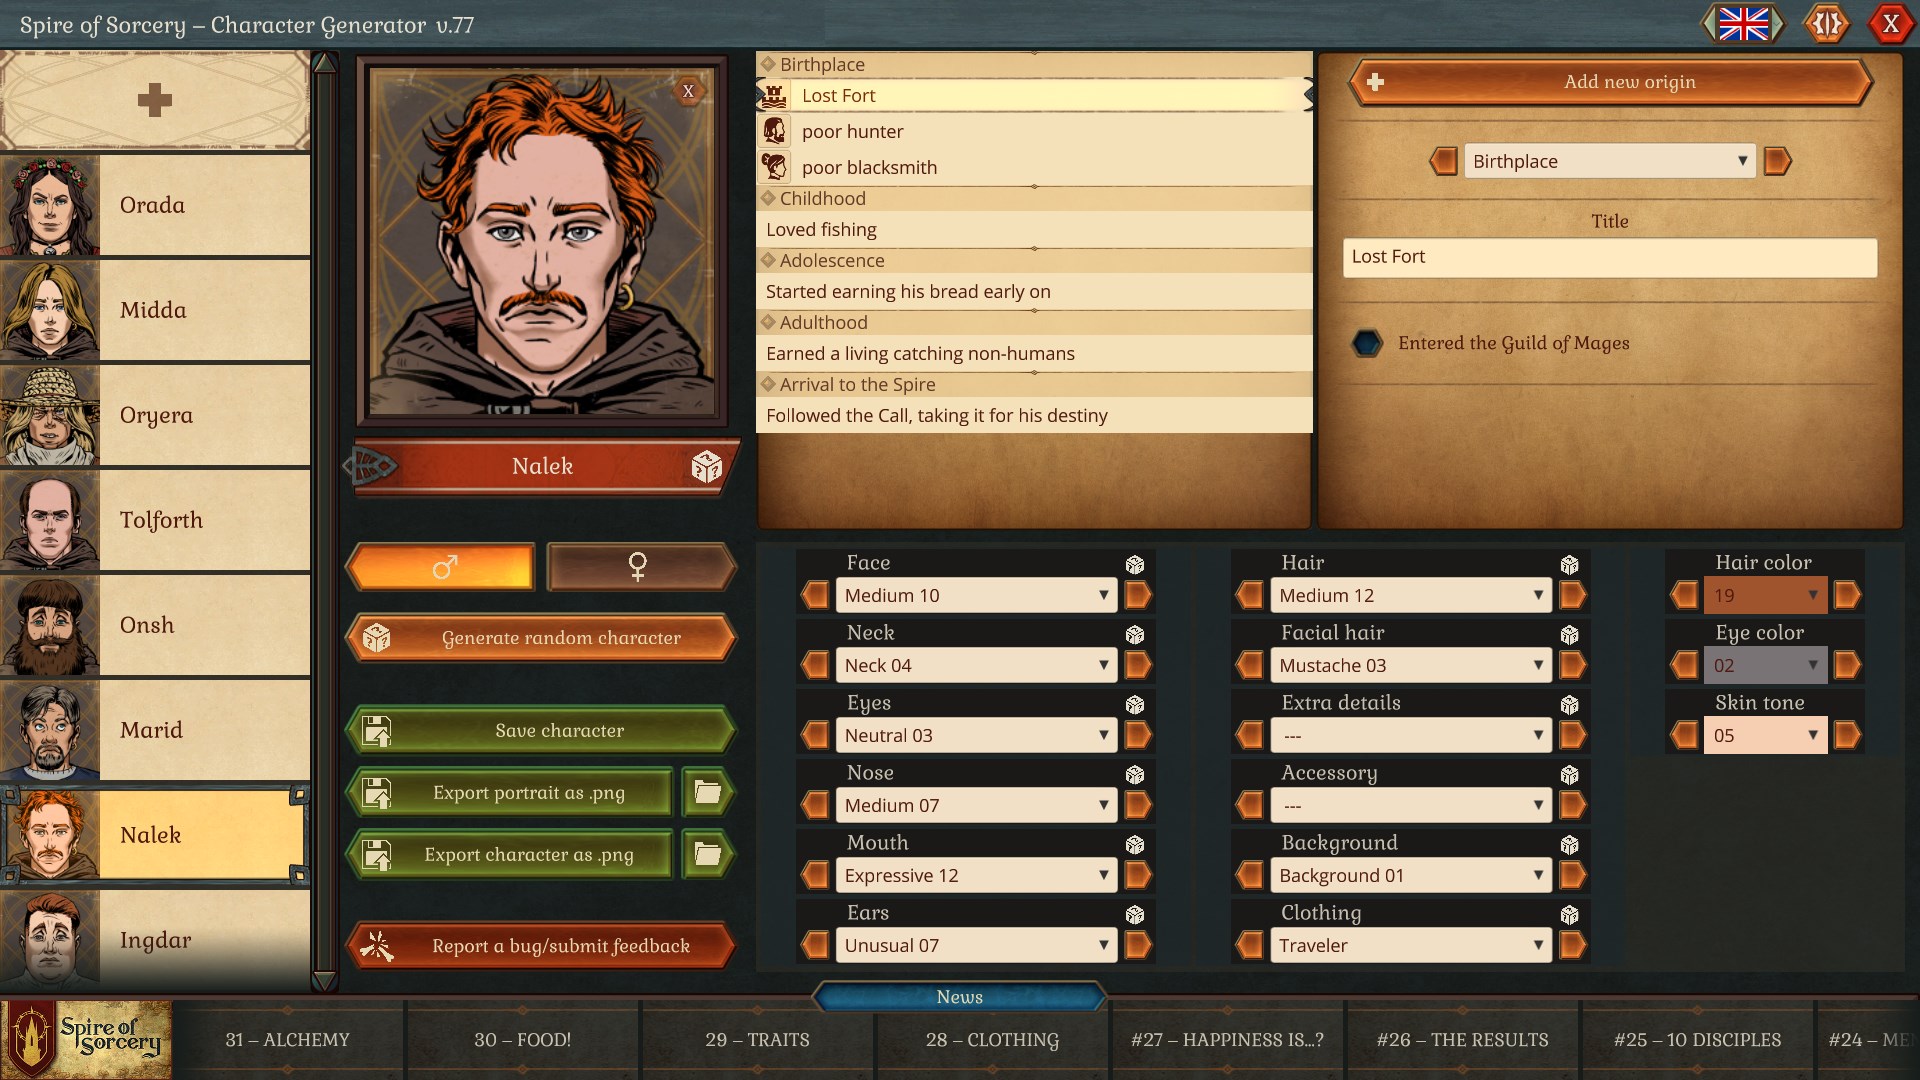 Spire Of Sorcery Character Generator On Steam